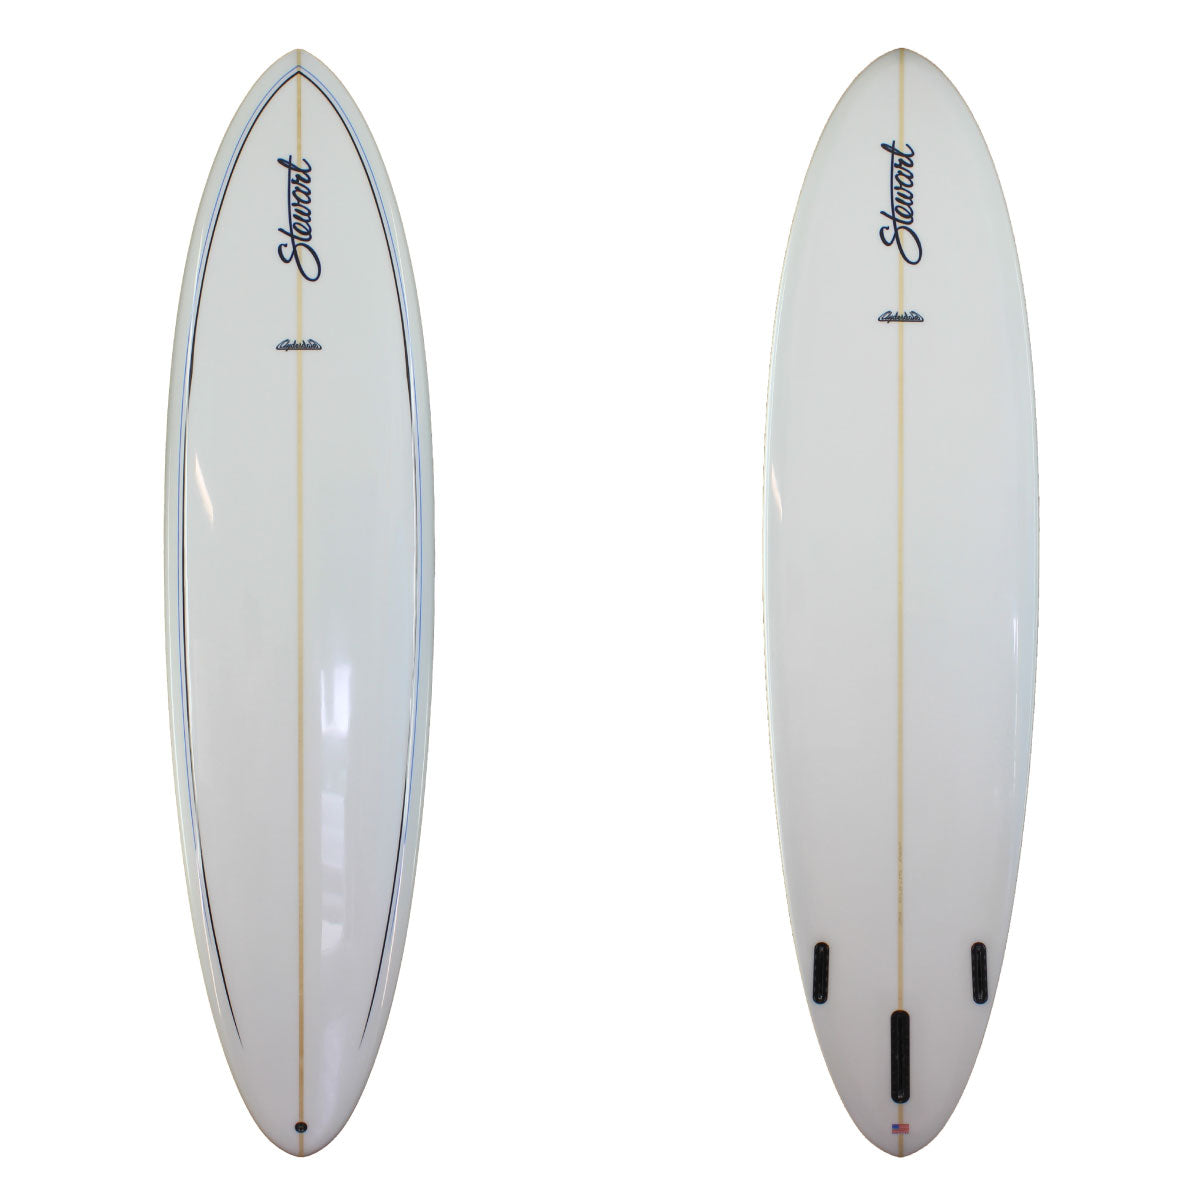 Stewart 9'0" Clydesdale Longboard with clear deck and blue and black pinlines and clear bottom with gloss polish  (9'0", 24", 3 5/8") B#127499